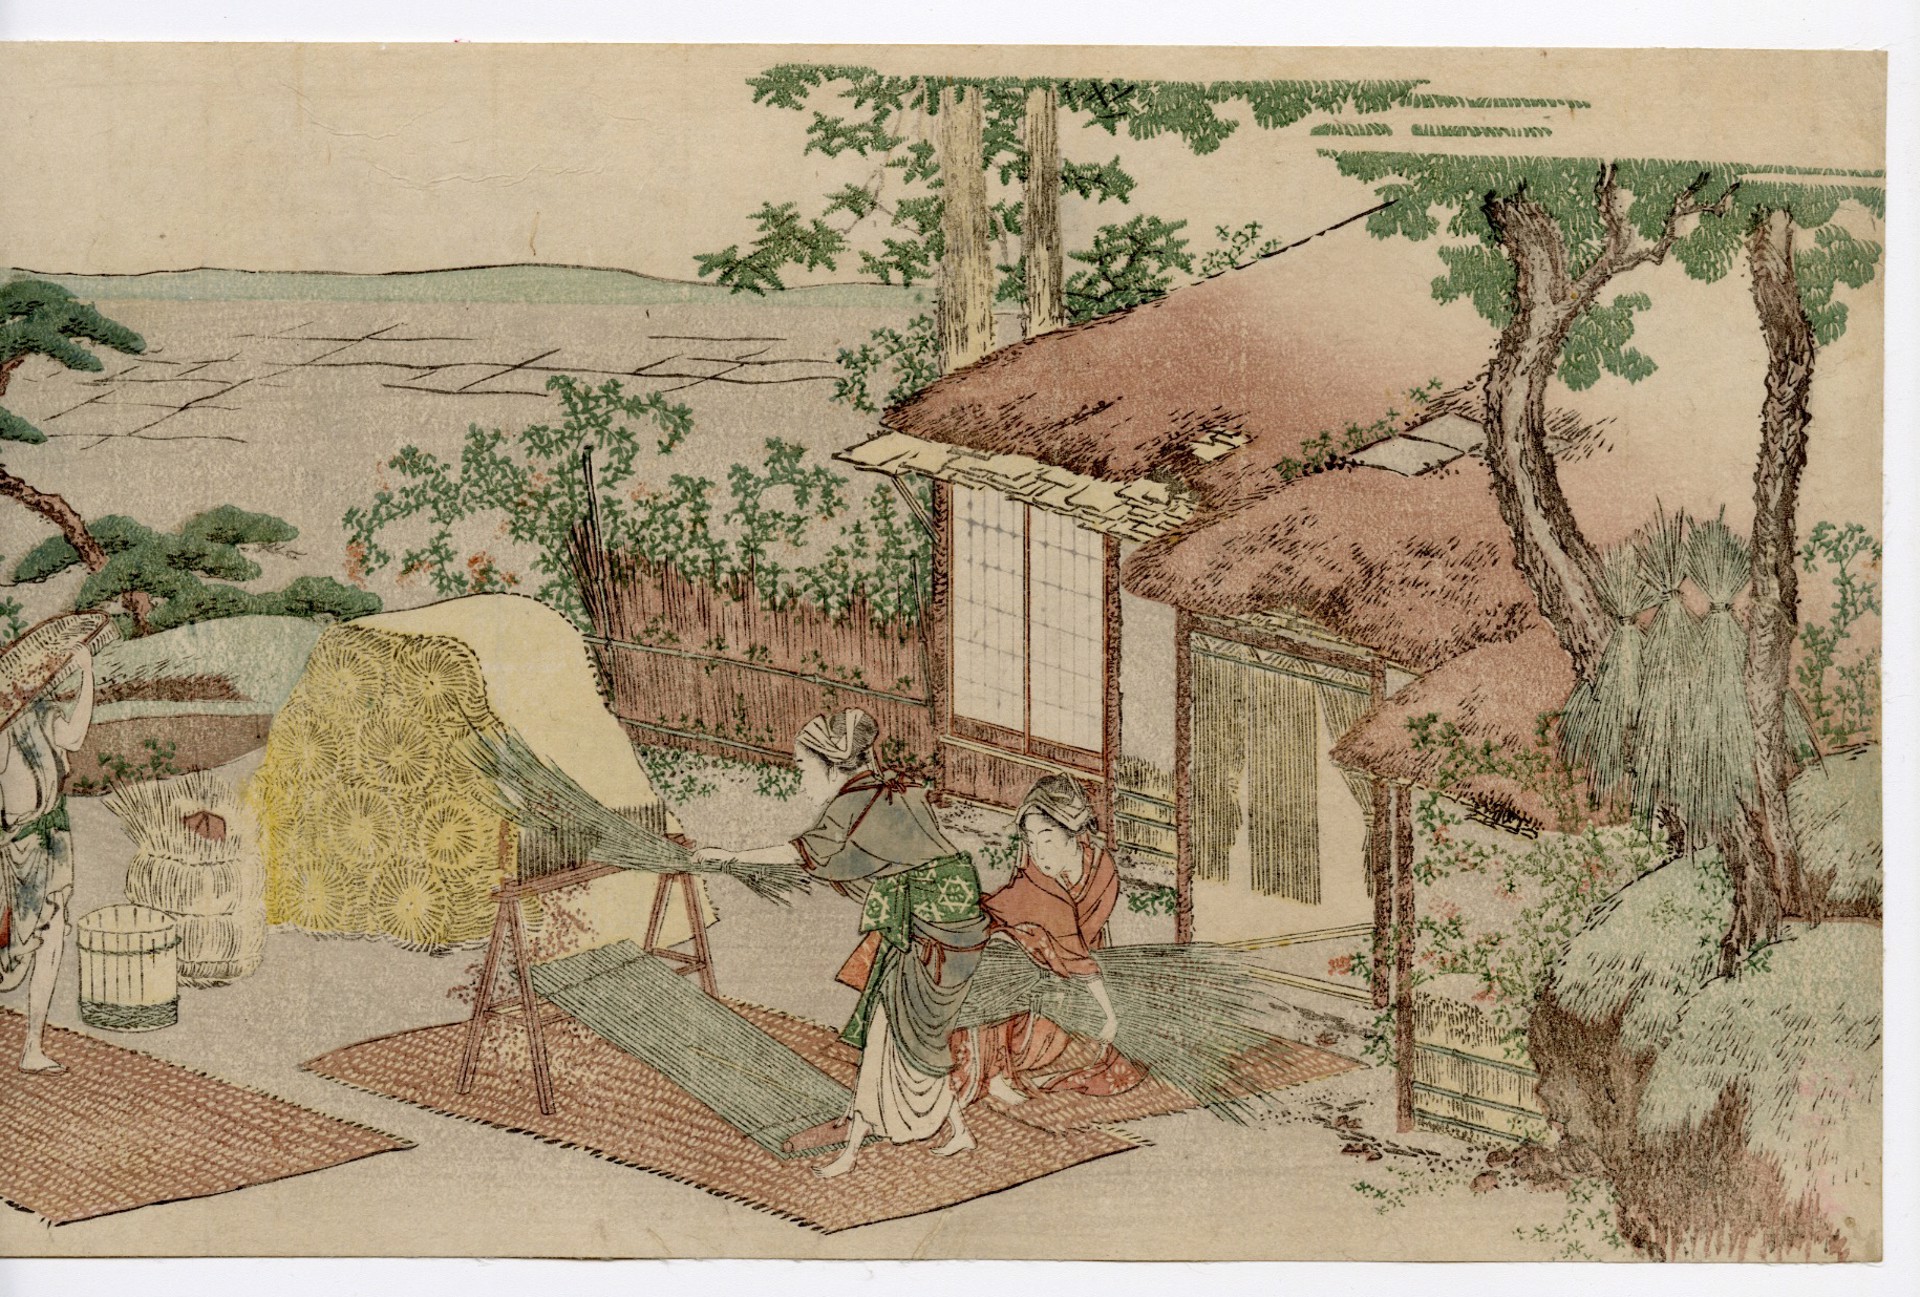 Winnowing Rice at an Ancient or Old Style Market on the Bank of a River by Hokusai